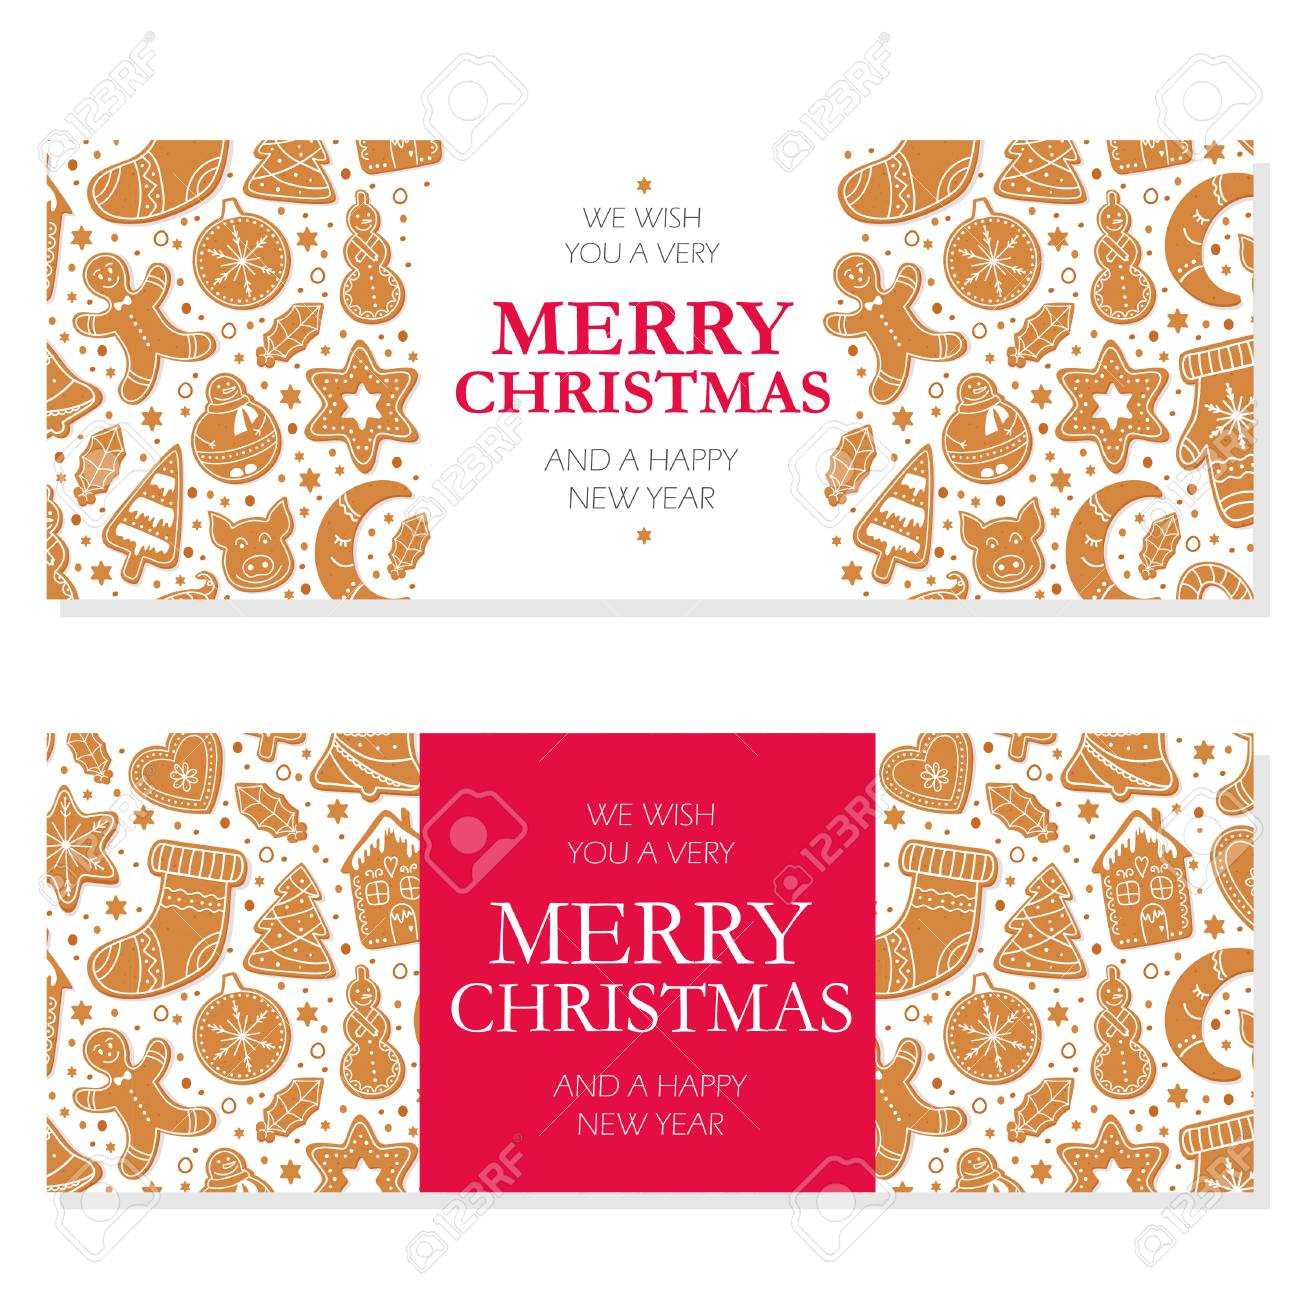 Invitation Merry Christmas Banner And Card Design Template. Homemade  Gingerbread Cookies Figures Of Snowman, Pig And Sock, Gingerbread Men,  Stars In Within Homemade Banner Template